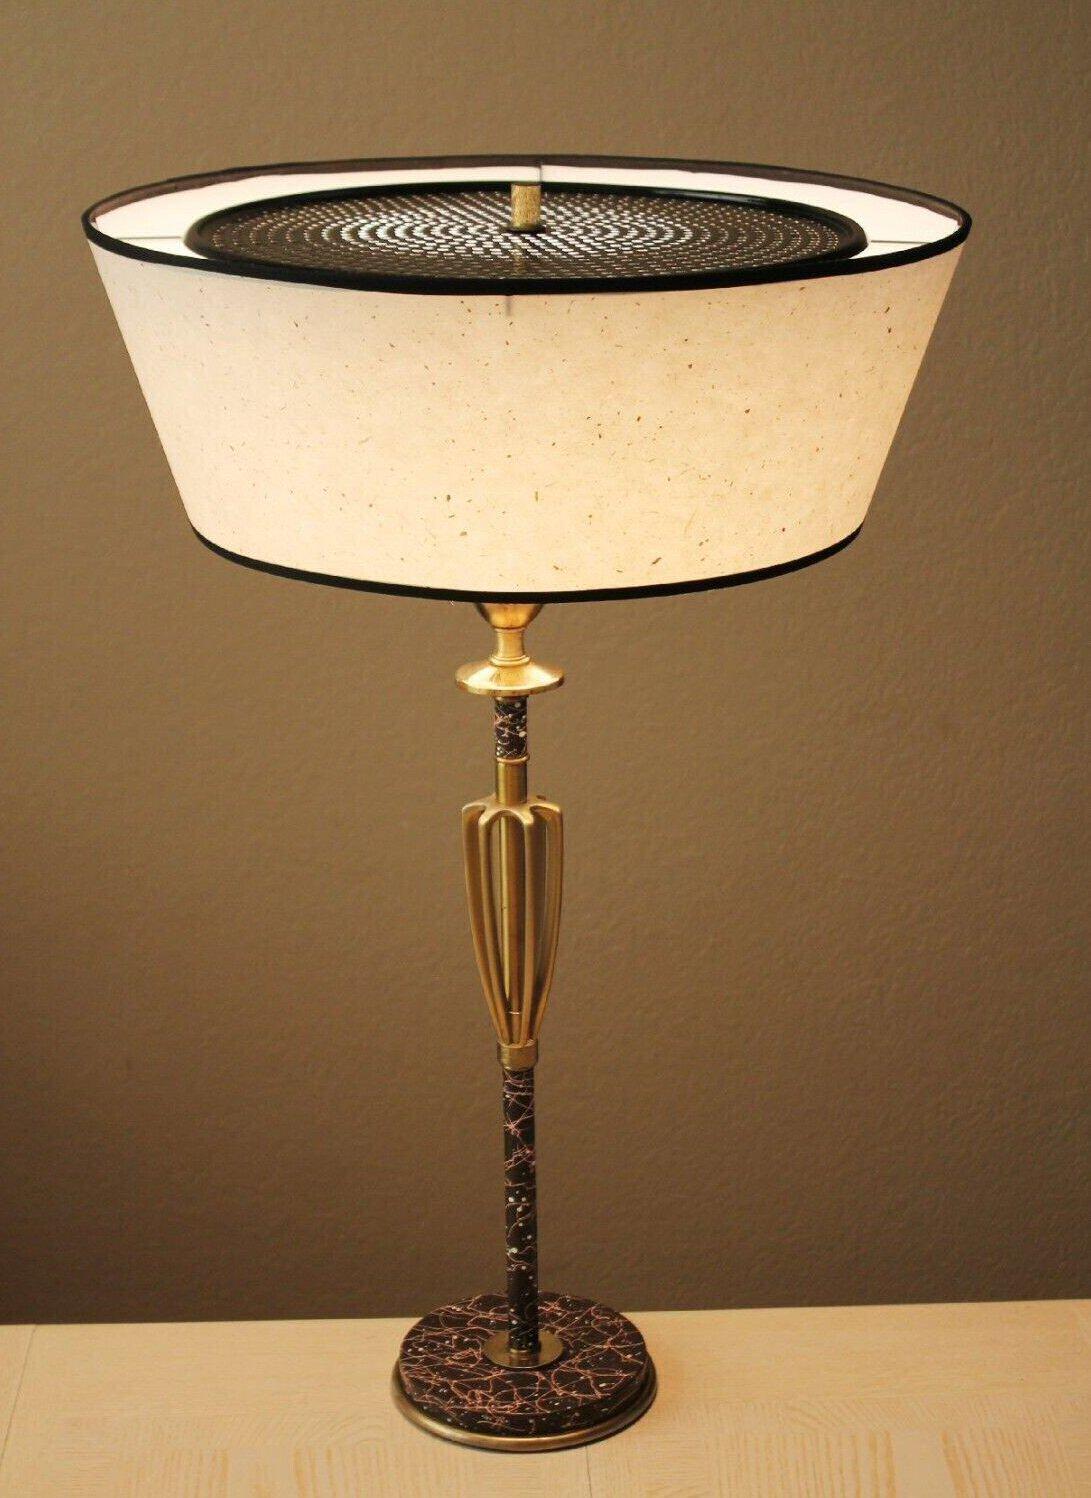 Rare Rembrandt Lamp! Iconic Mid Century Modern Atomic Blender Design! MCM 1950s In Good Condition For Sale In Peoria, AZ